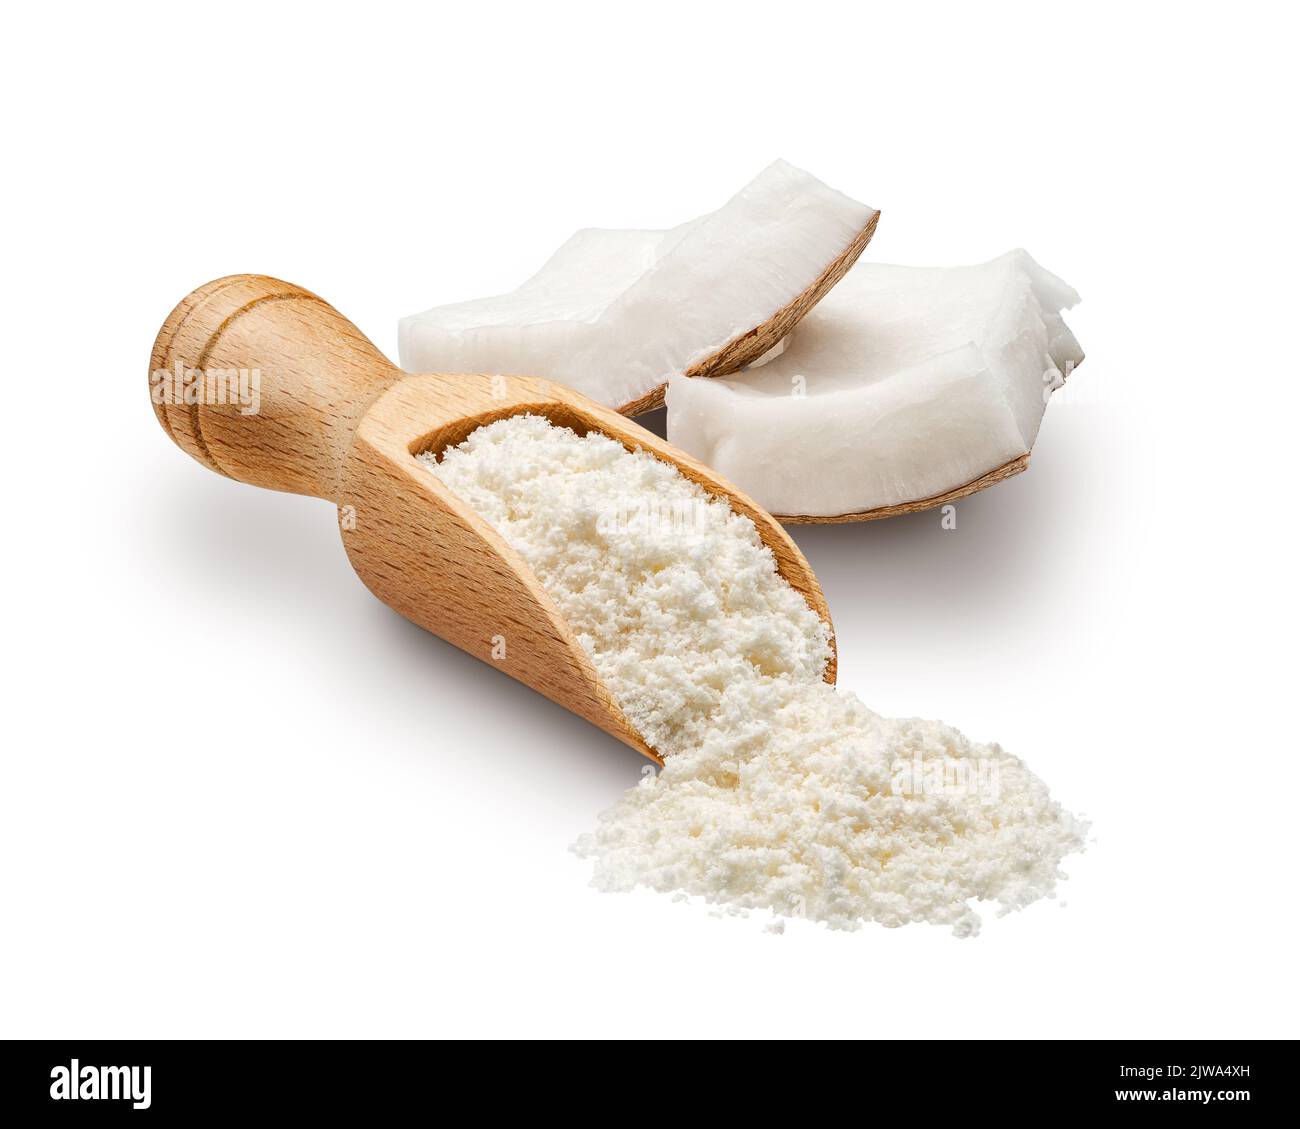 Coconut flour scattered from wooden scoop isolated on white Stock Photo